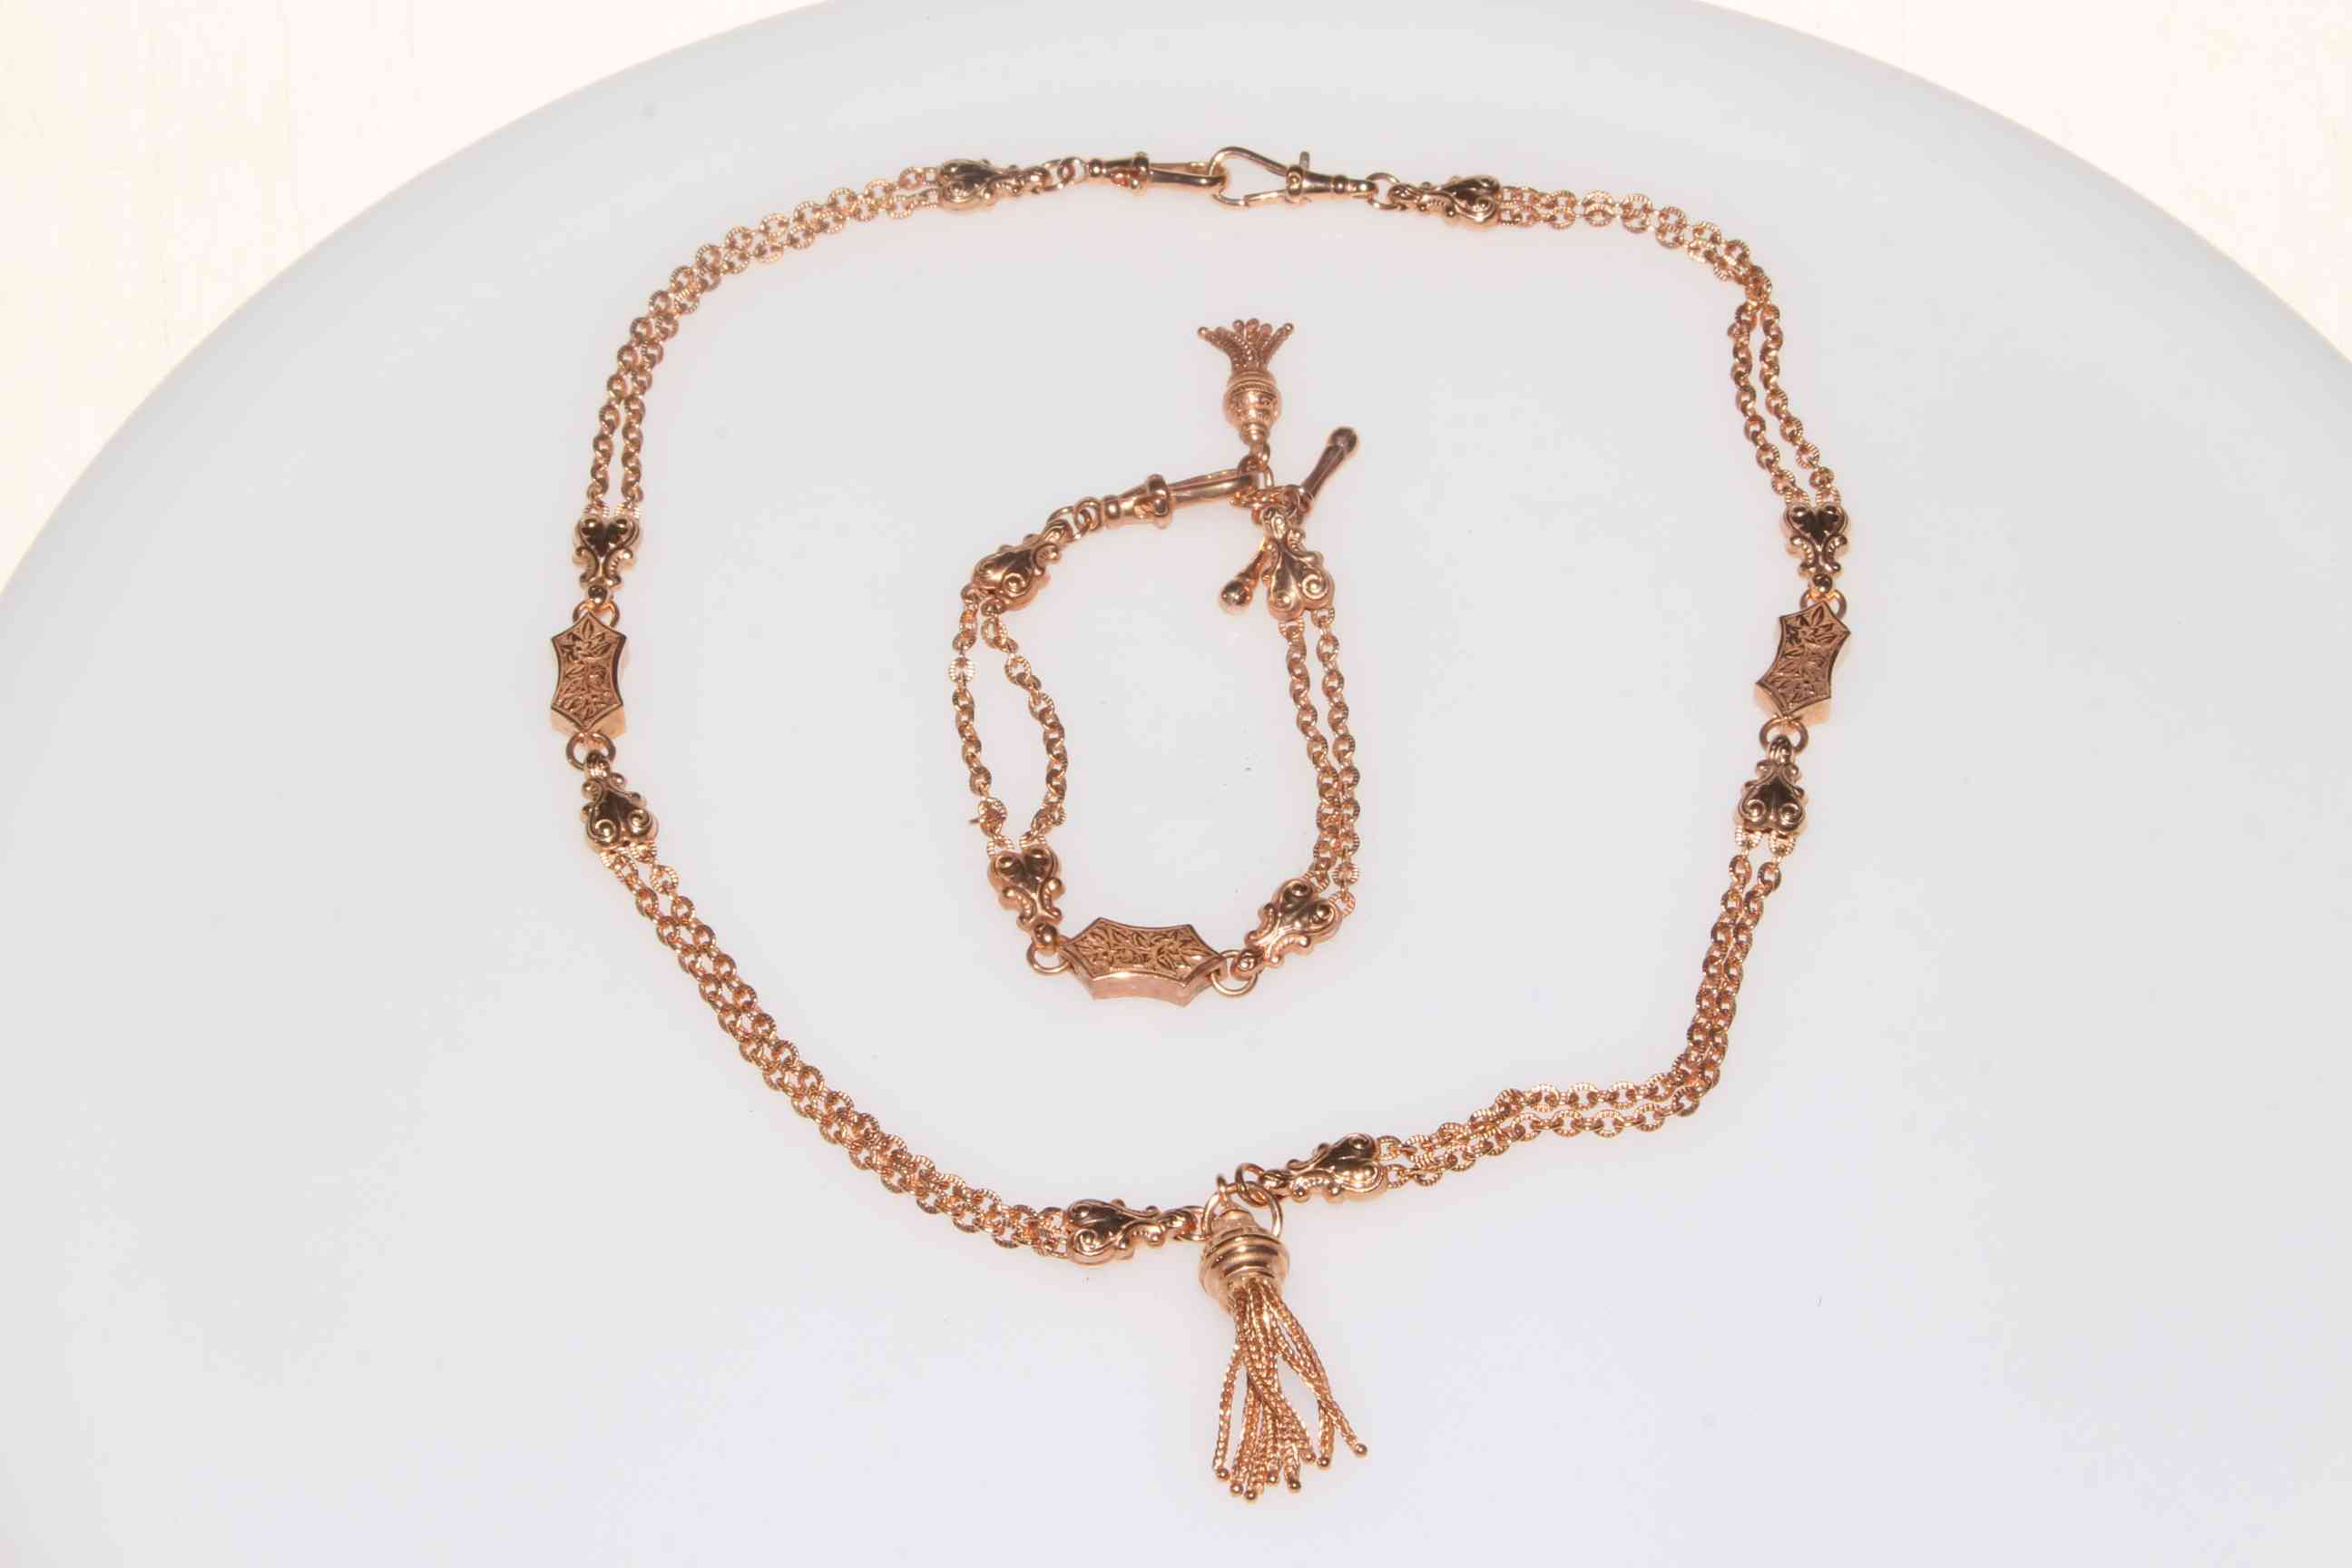 9ct Rose gold ornate necklace and bracelet in watch albert style